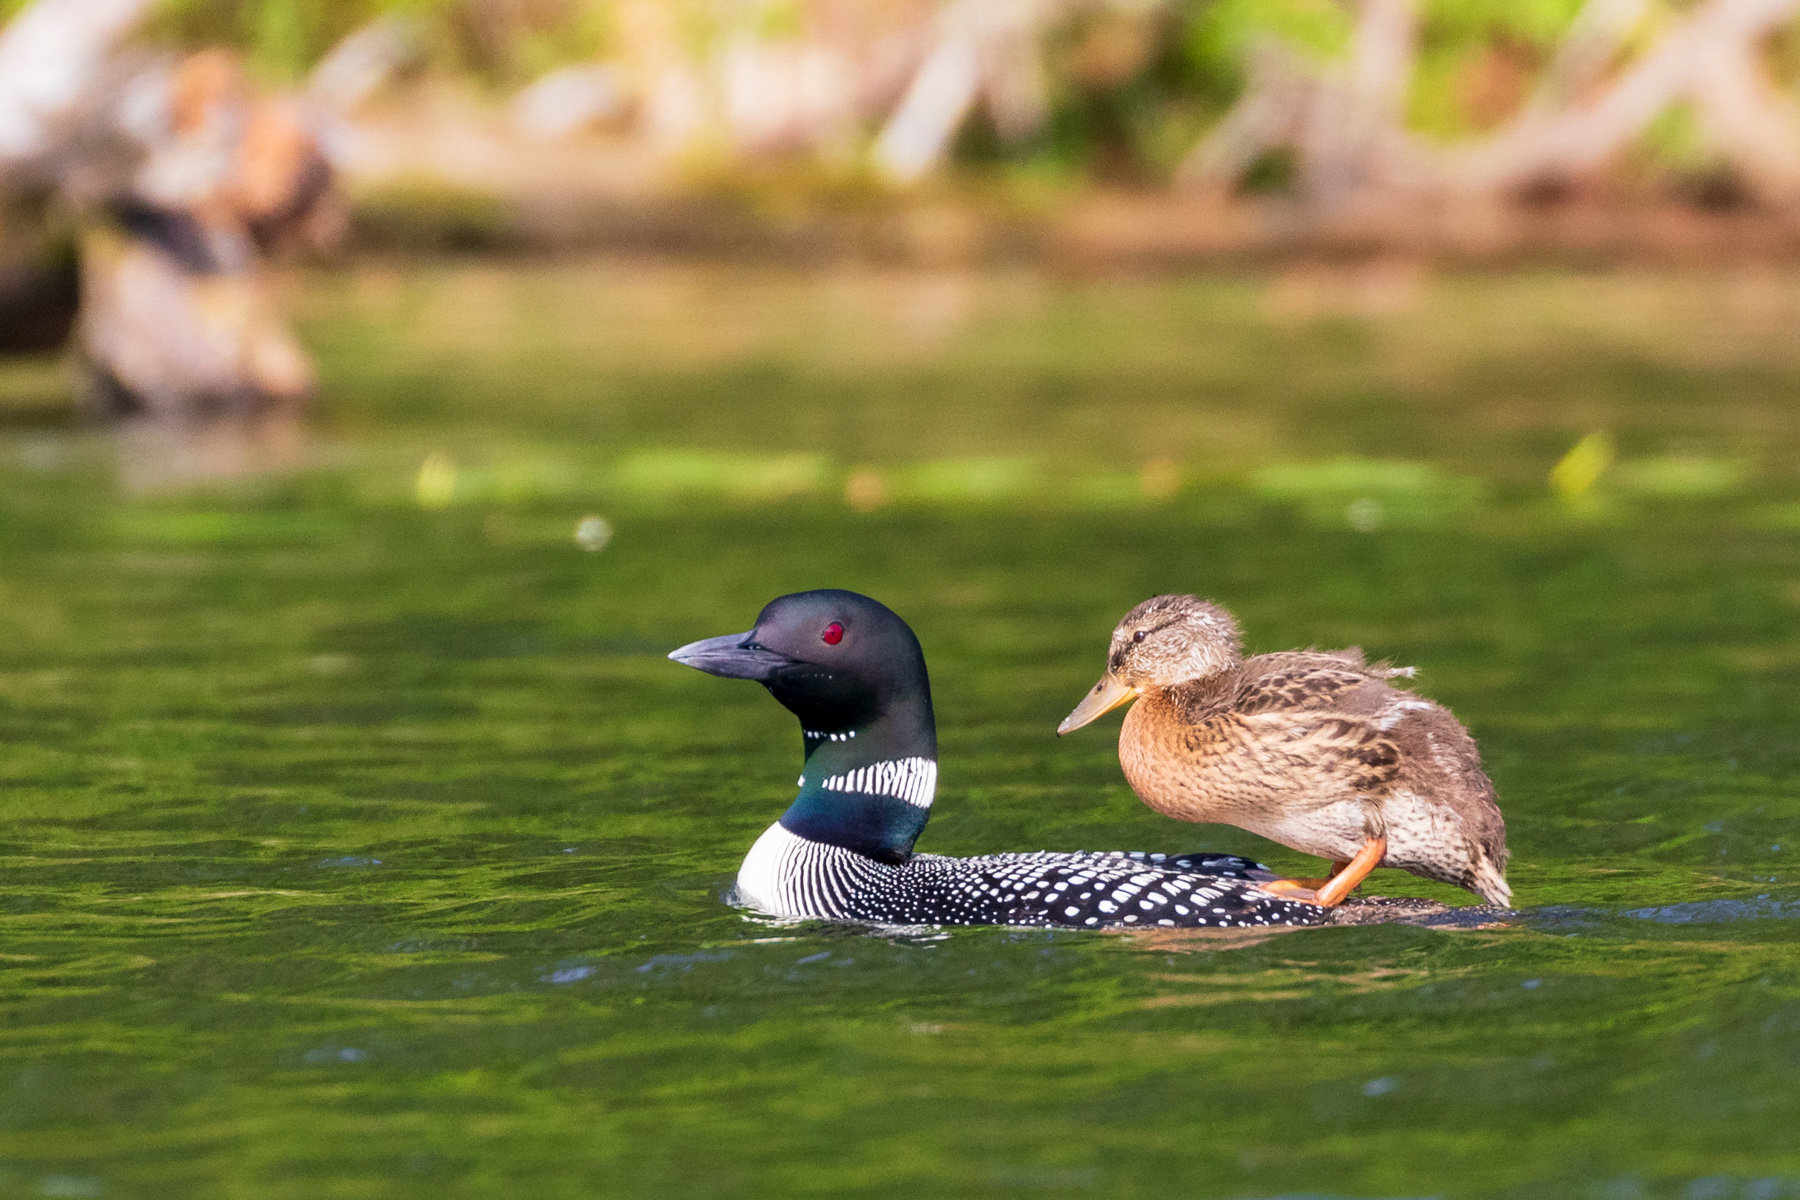 PHOTO: The duckling has adopted some loon traits like standing on its adoptive parent's back in the water.